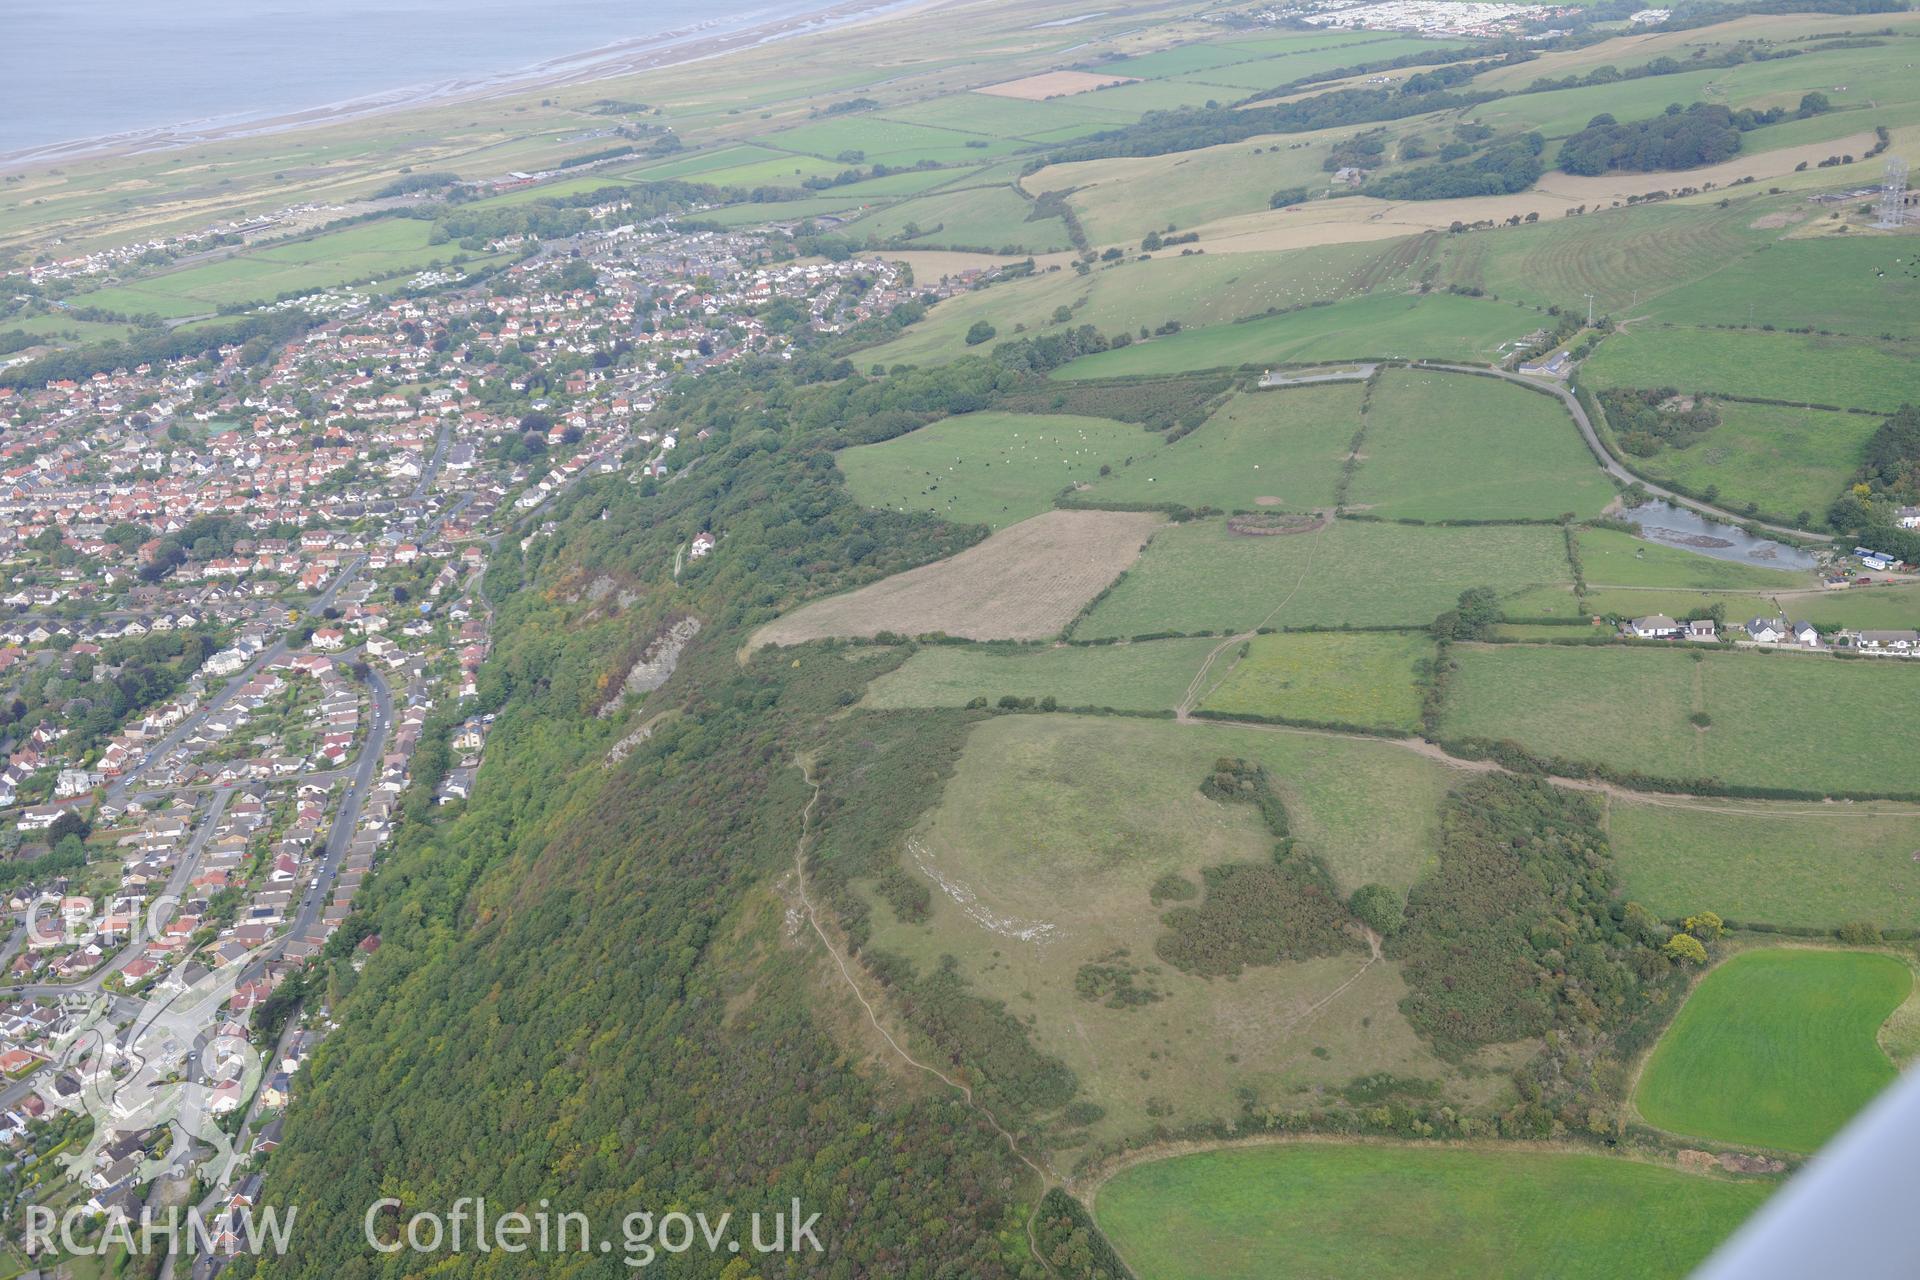 The town of Prestatyn. Oblique aerial photograph taken during the Royal Commission's programme of archaeological aerial reconnaissance by Toby Driver on 11th September 2015.